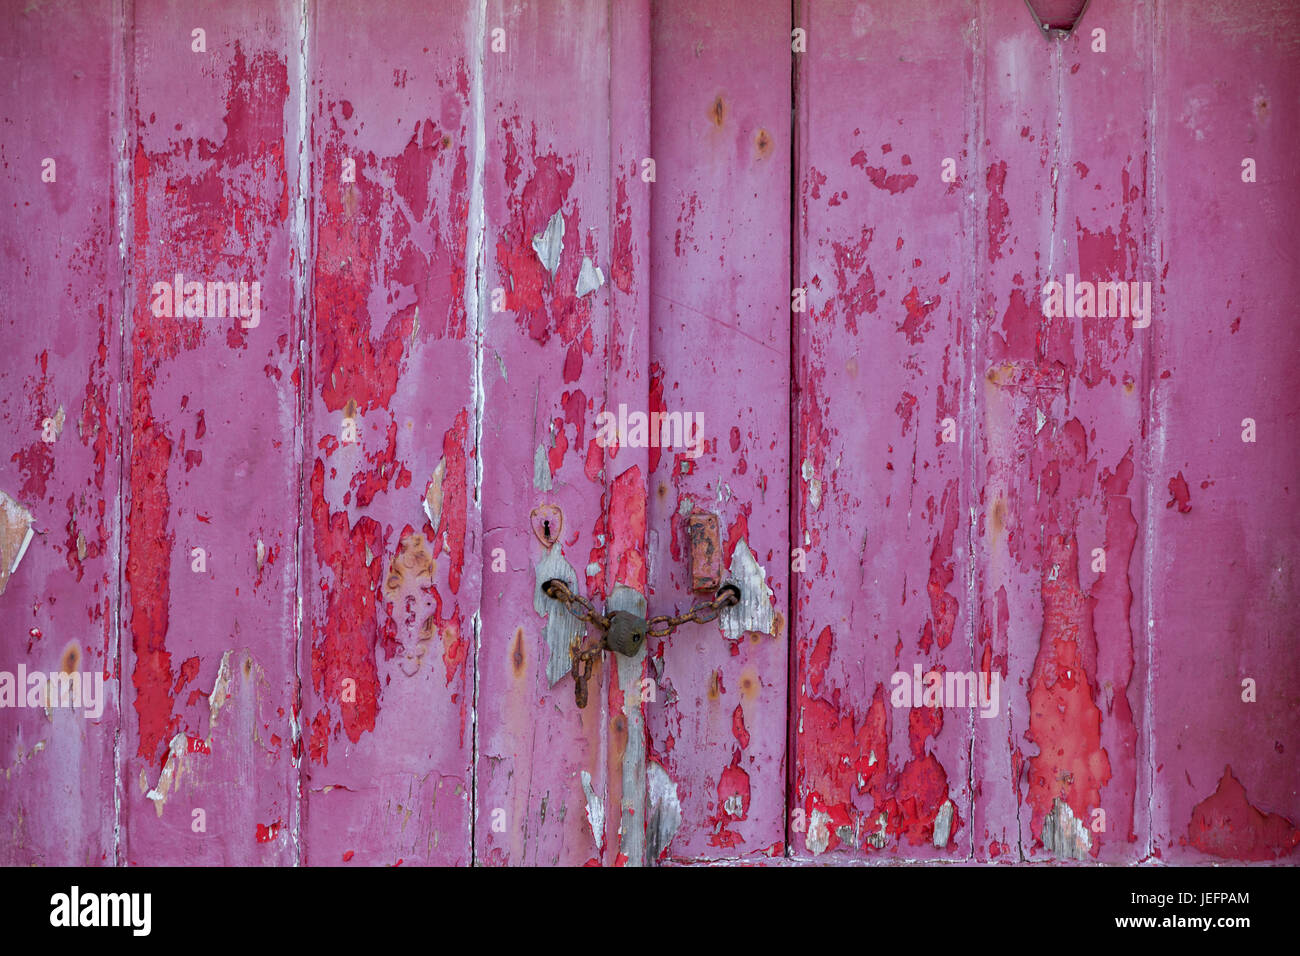 old raspberry colorer door with damaged texture Stock Photo